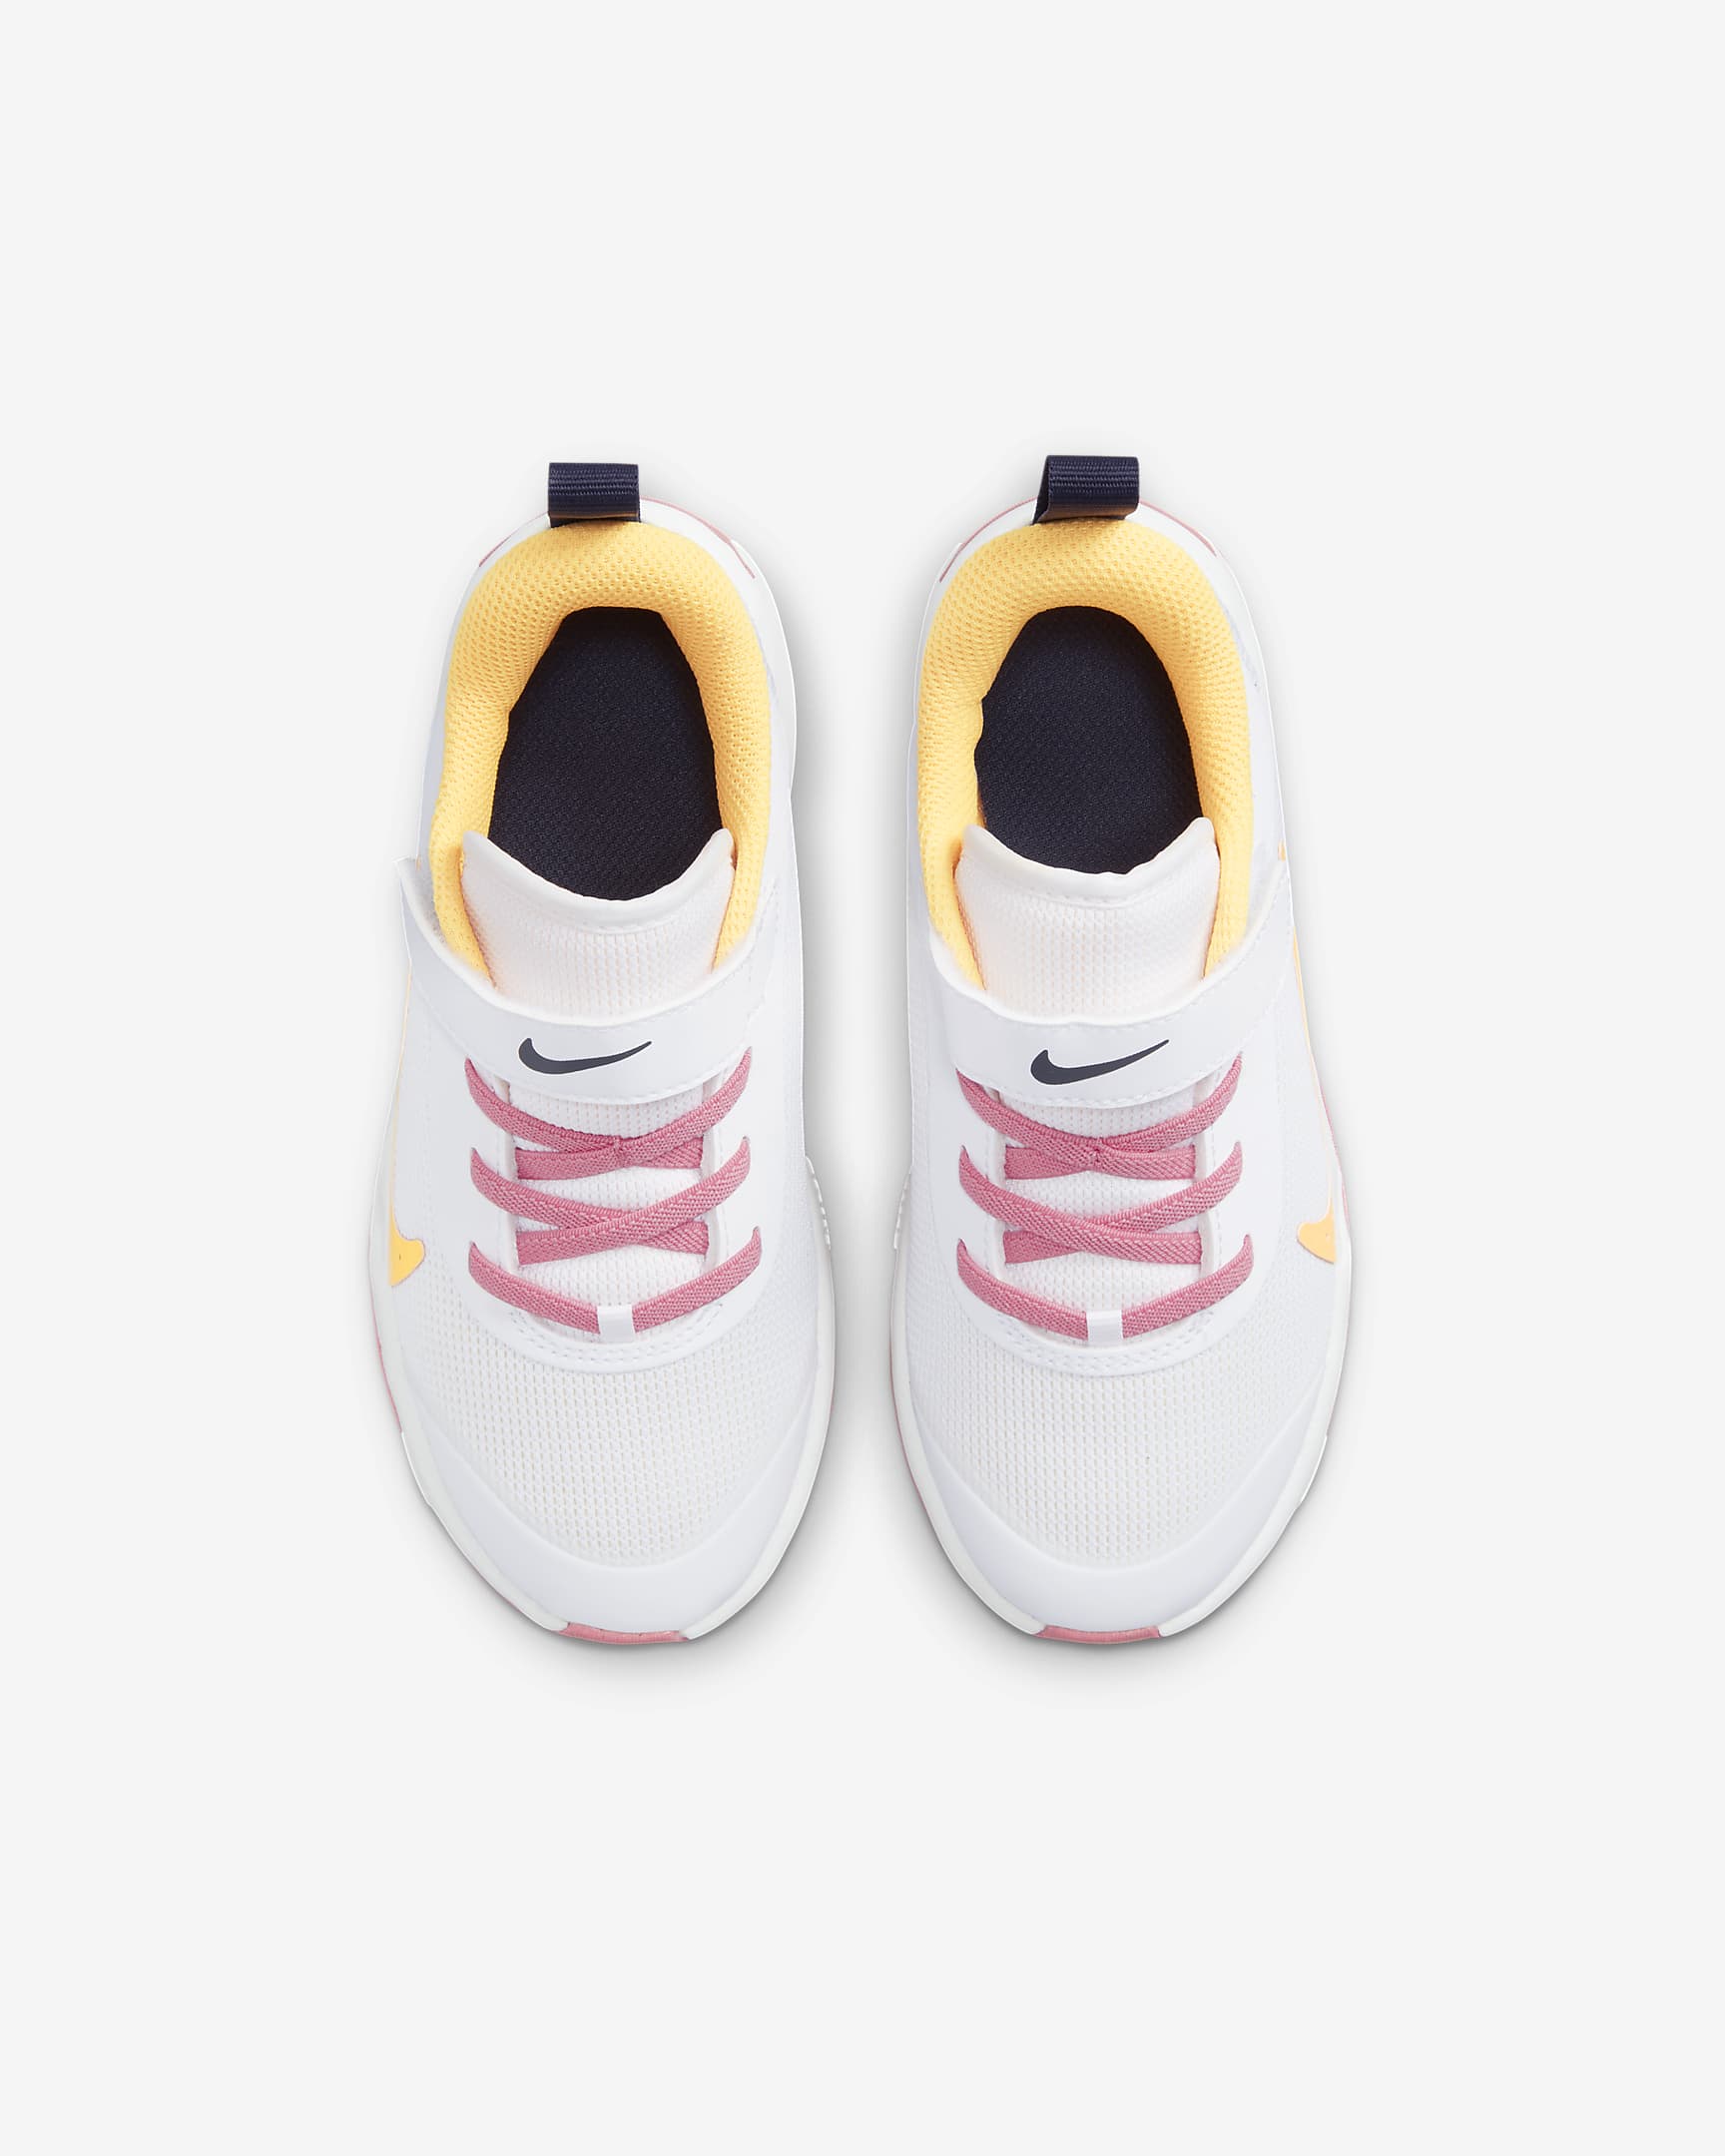 Nike Omni Multi-Court Younger Kids' Shoes - White/Coral Chalk/Sea Coral/Citron Pulse